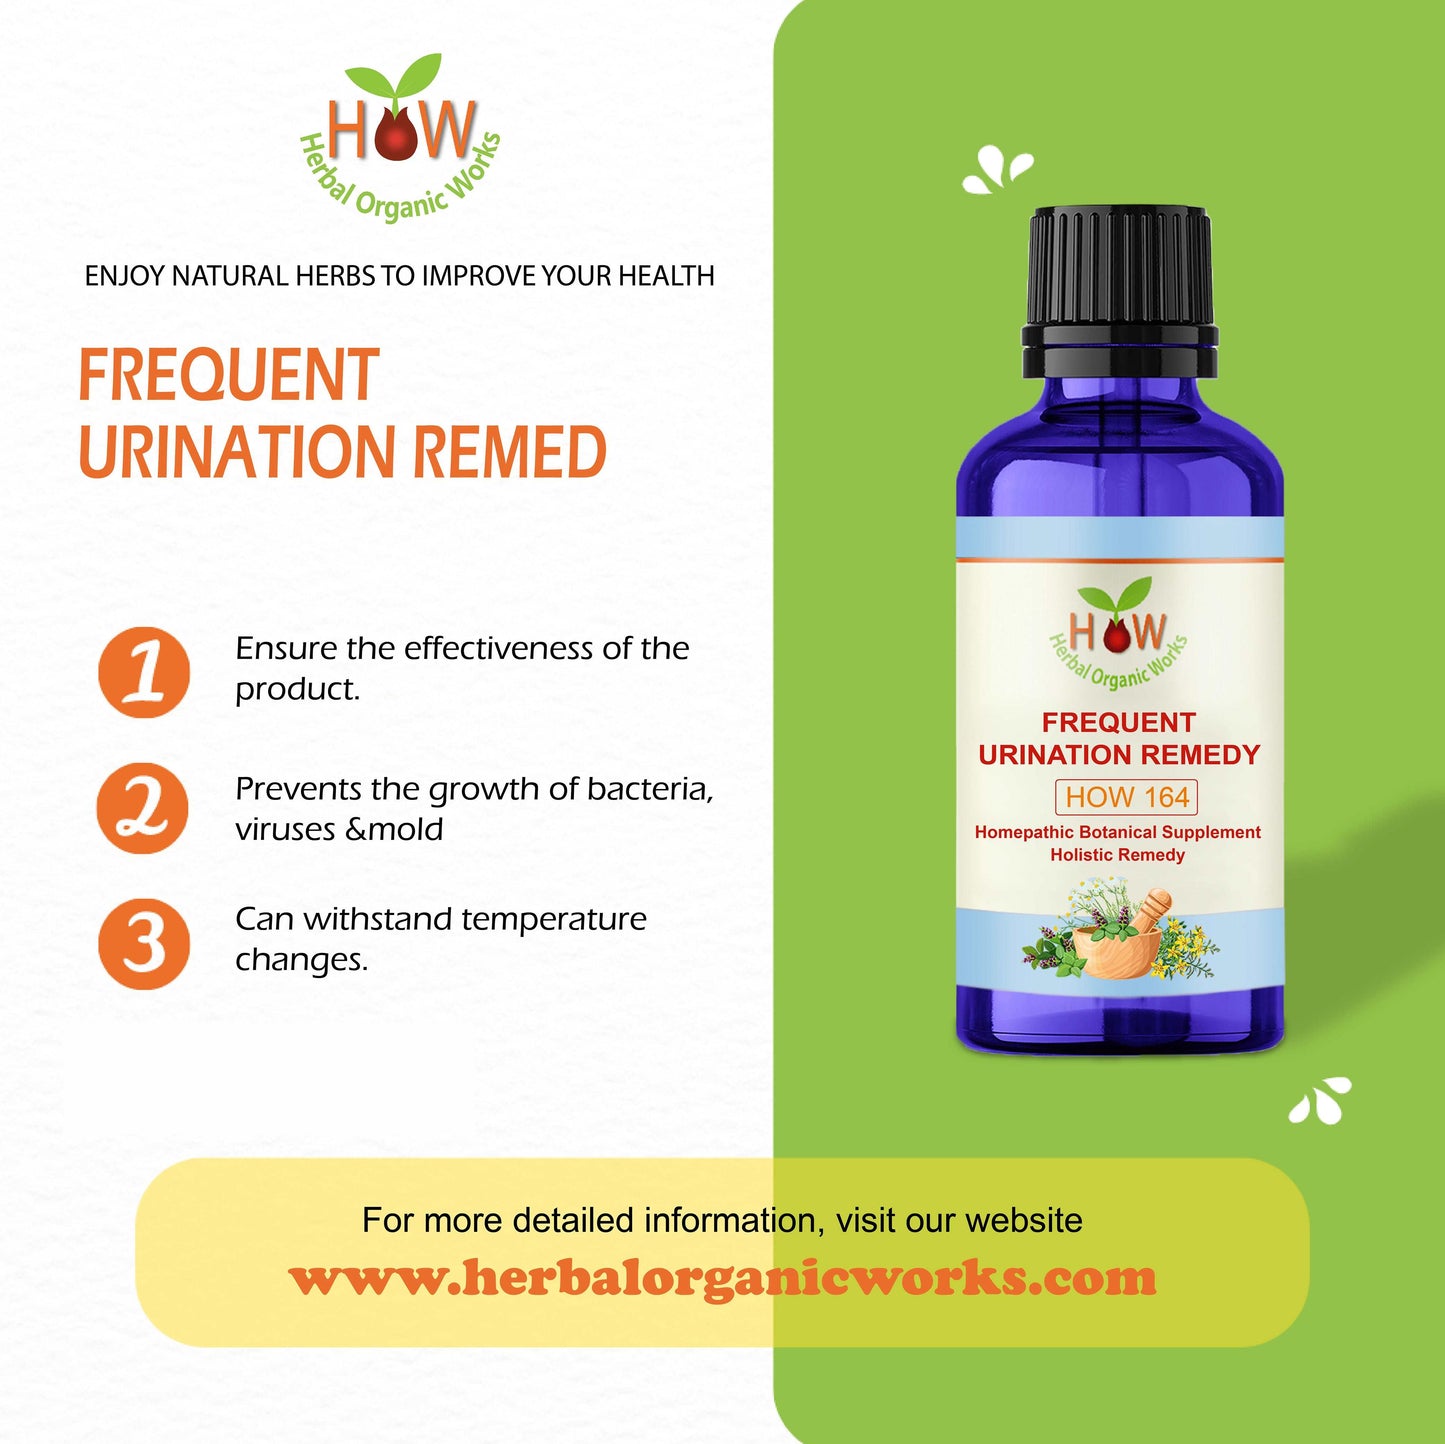 FREQUENT URINATION & POLYURIA REDEMY (HOW164)